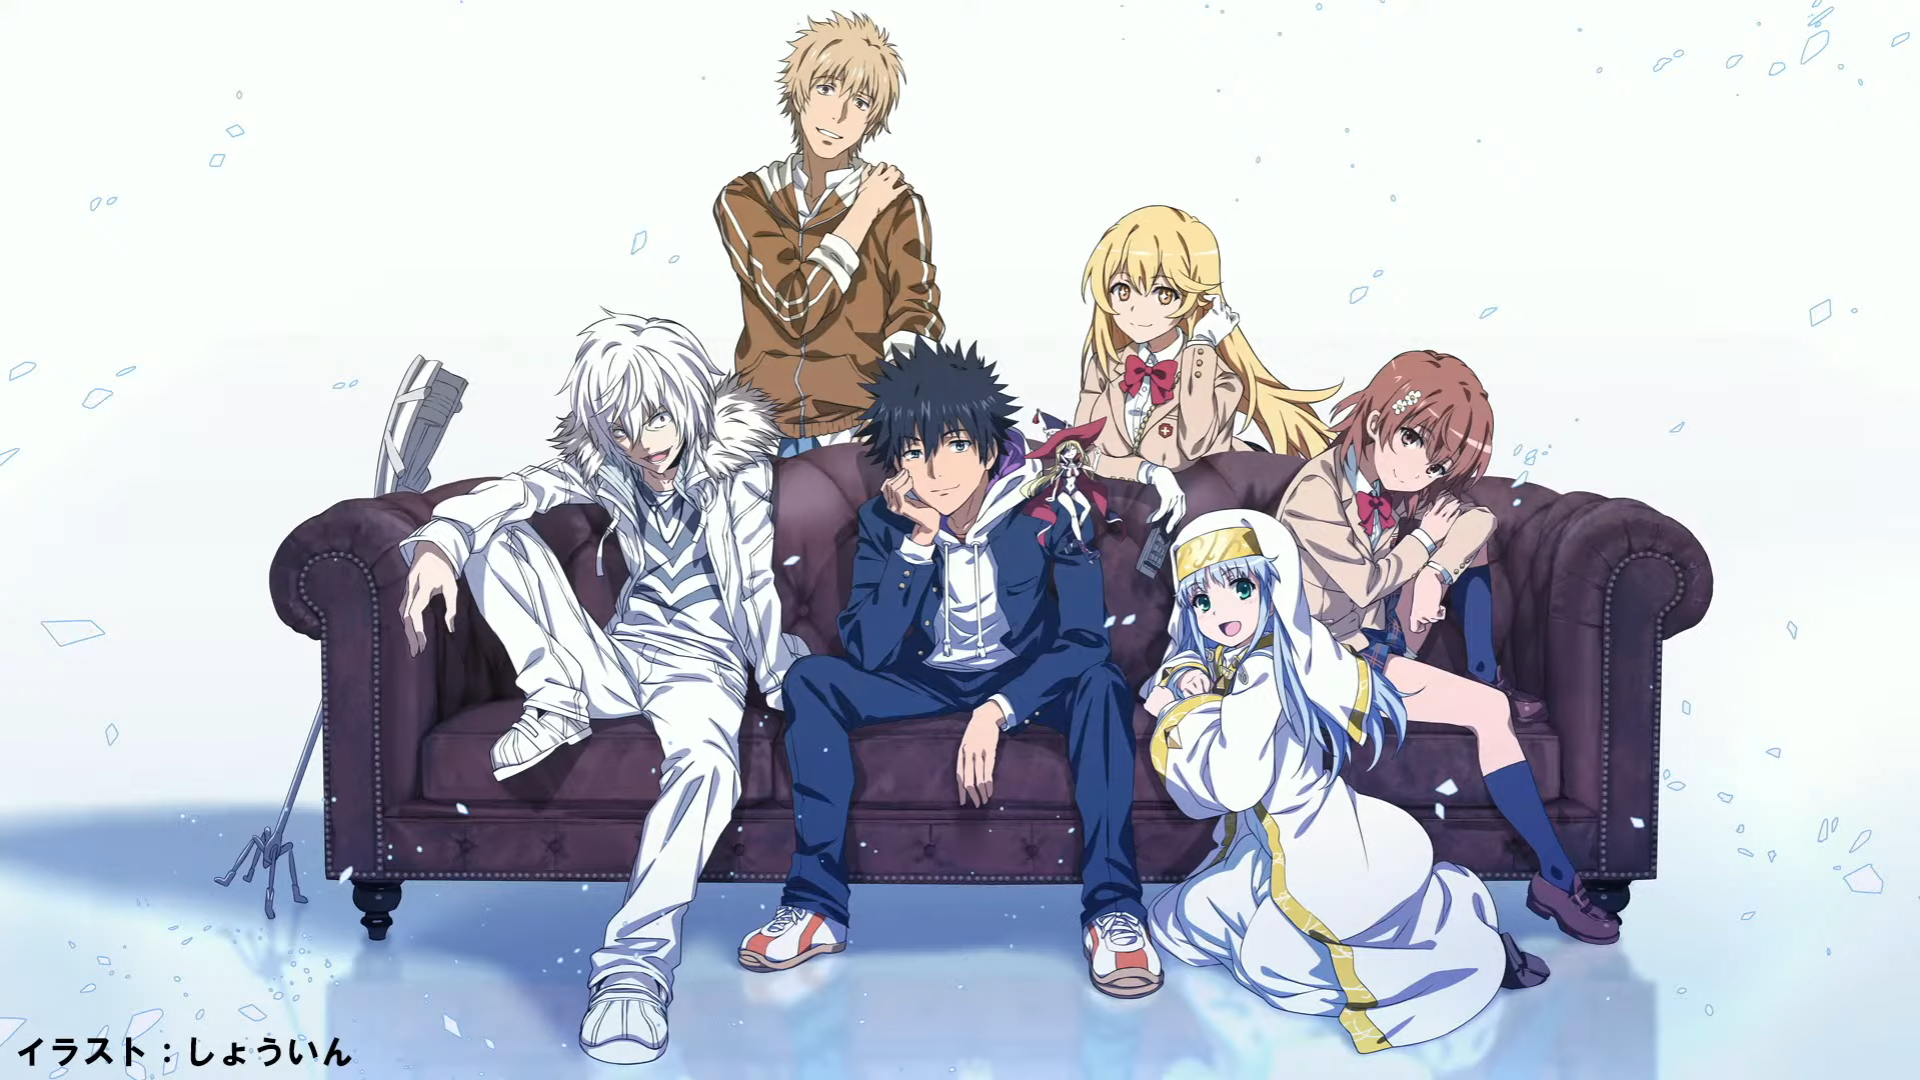 A Certain Magical Index: Imaginary Fest Reveals 4th Anniversary Art